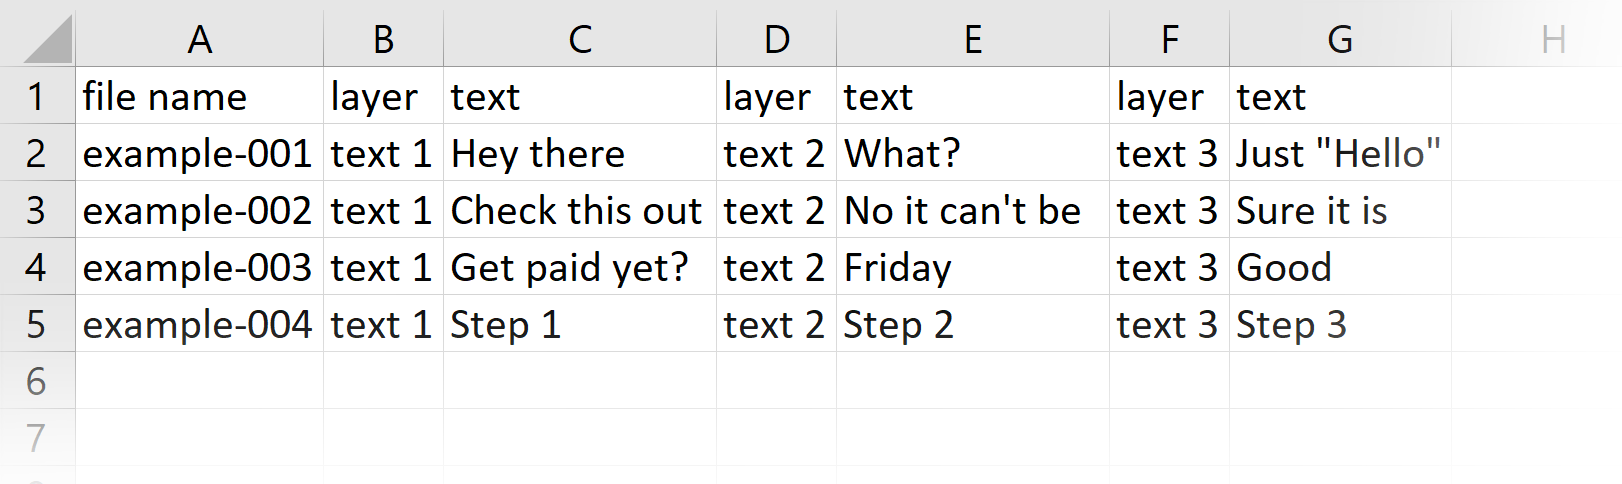 Text Update From CSV example data